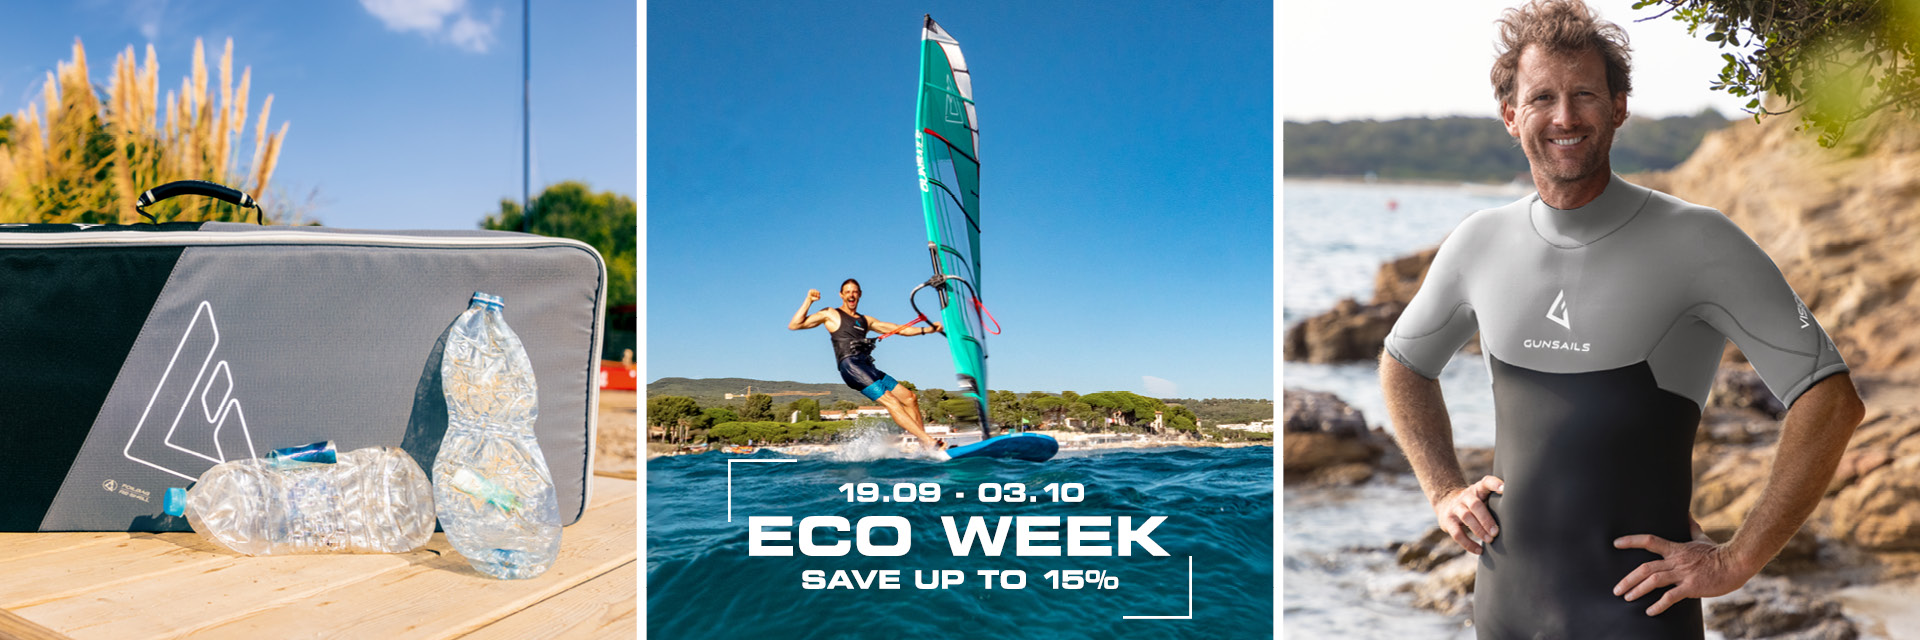 Eco Week - Save up to 15%